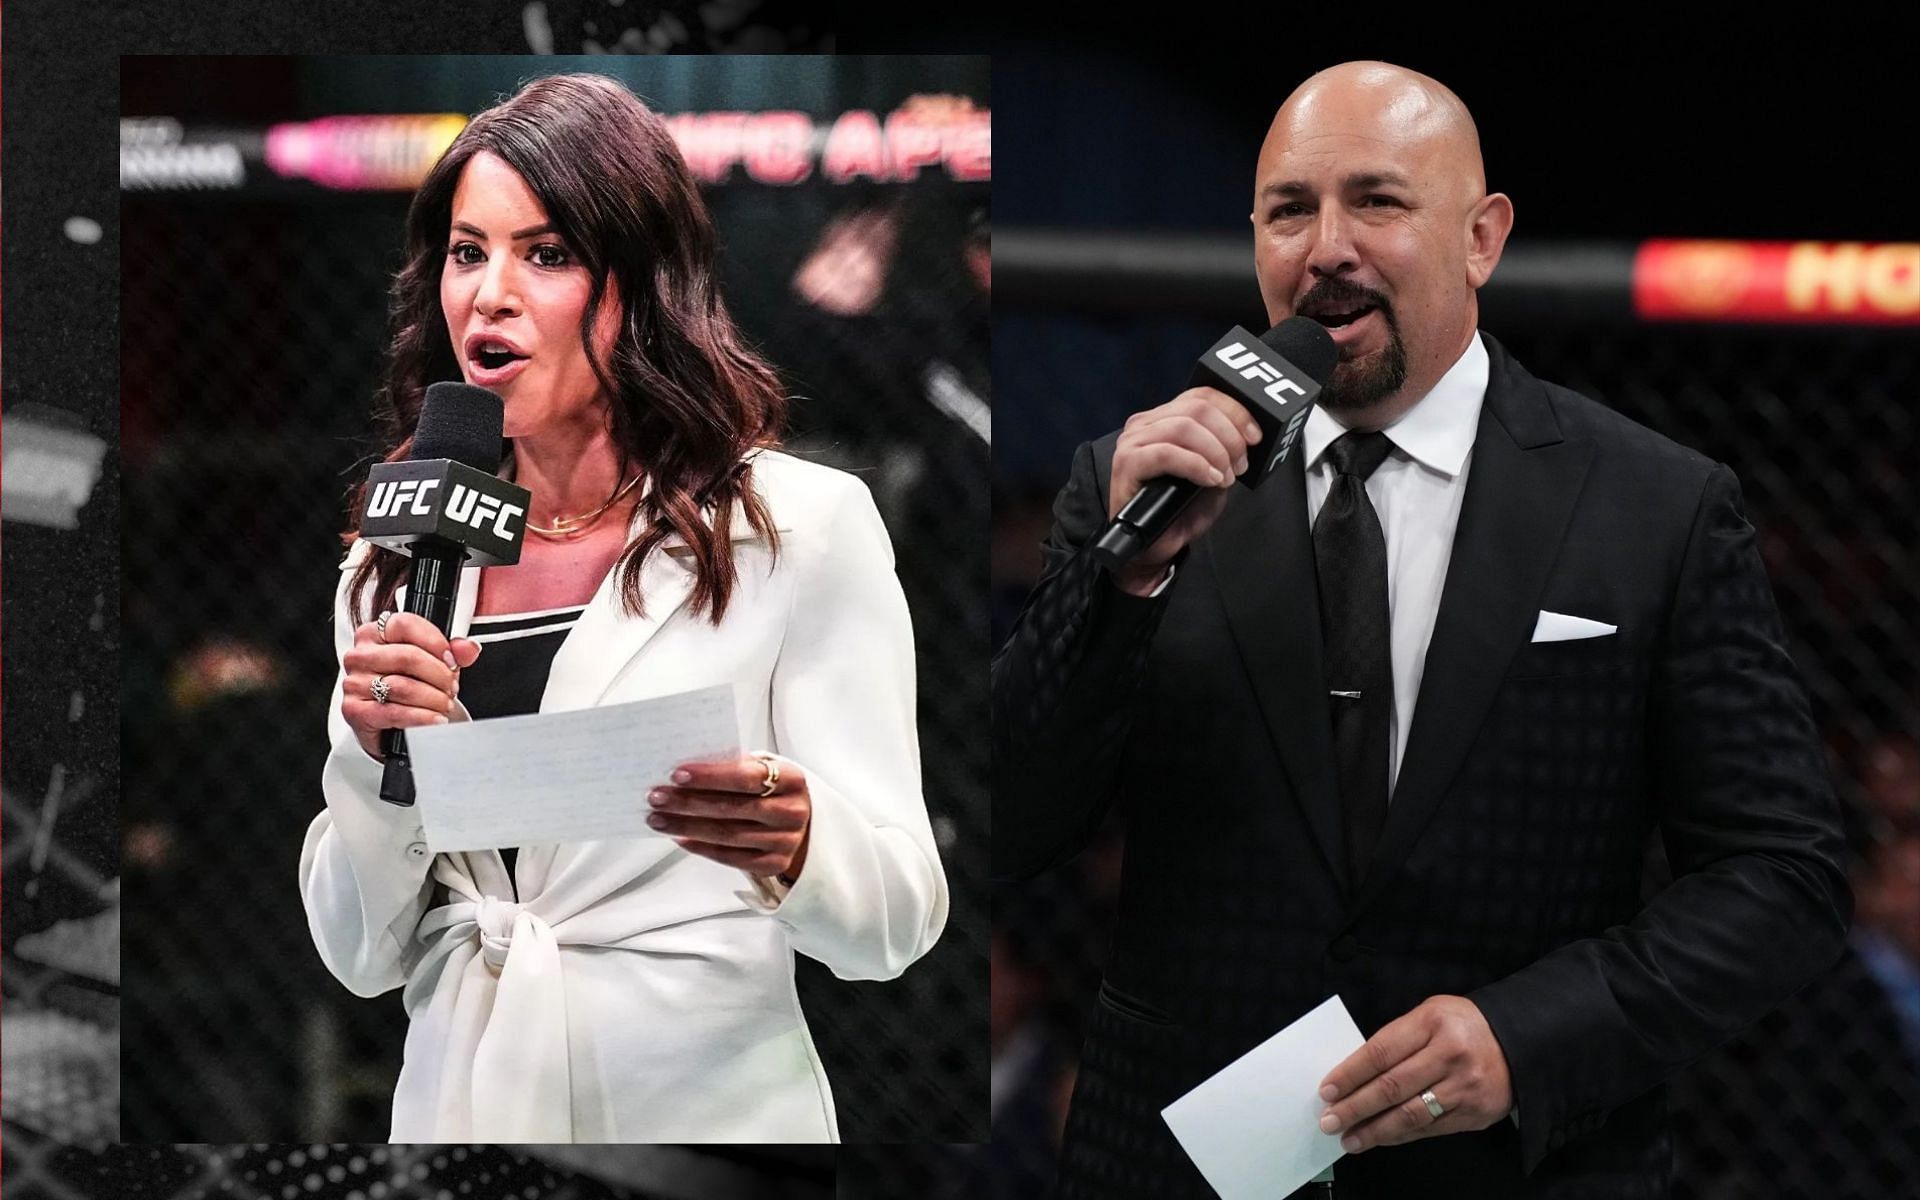 Joe Martinez was temporarily replaced by backstage reporter Charly Arnolt as ring announcer at UFC Vegas 91. [Image courtesy: @joeamartinez &amp; @charlyontv on Instagram]